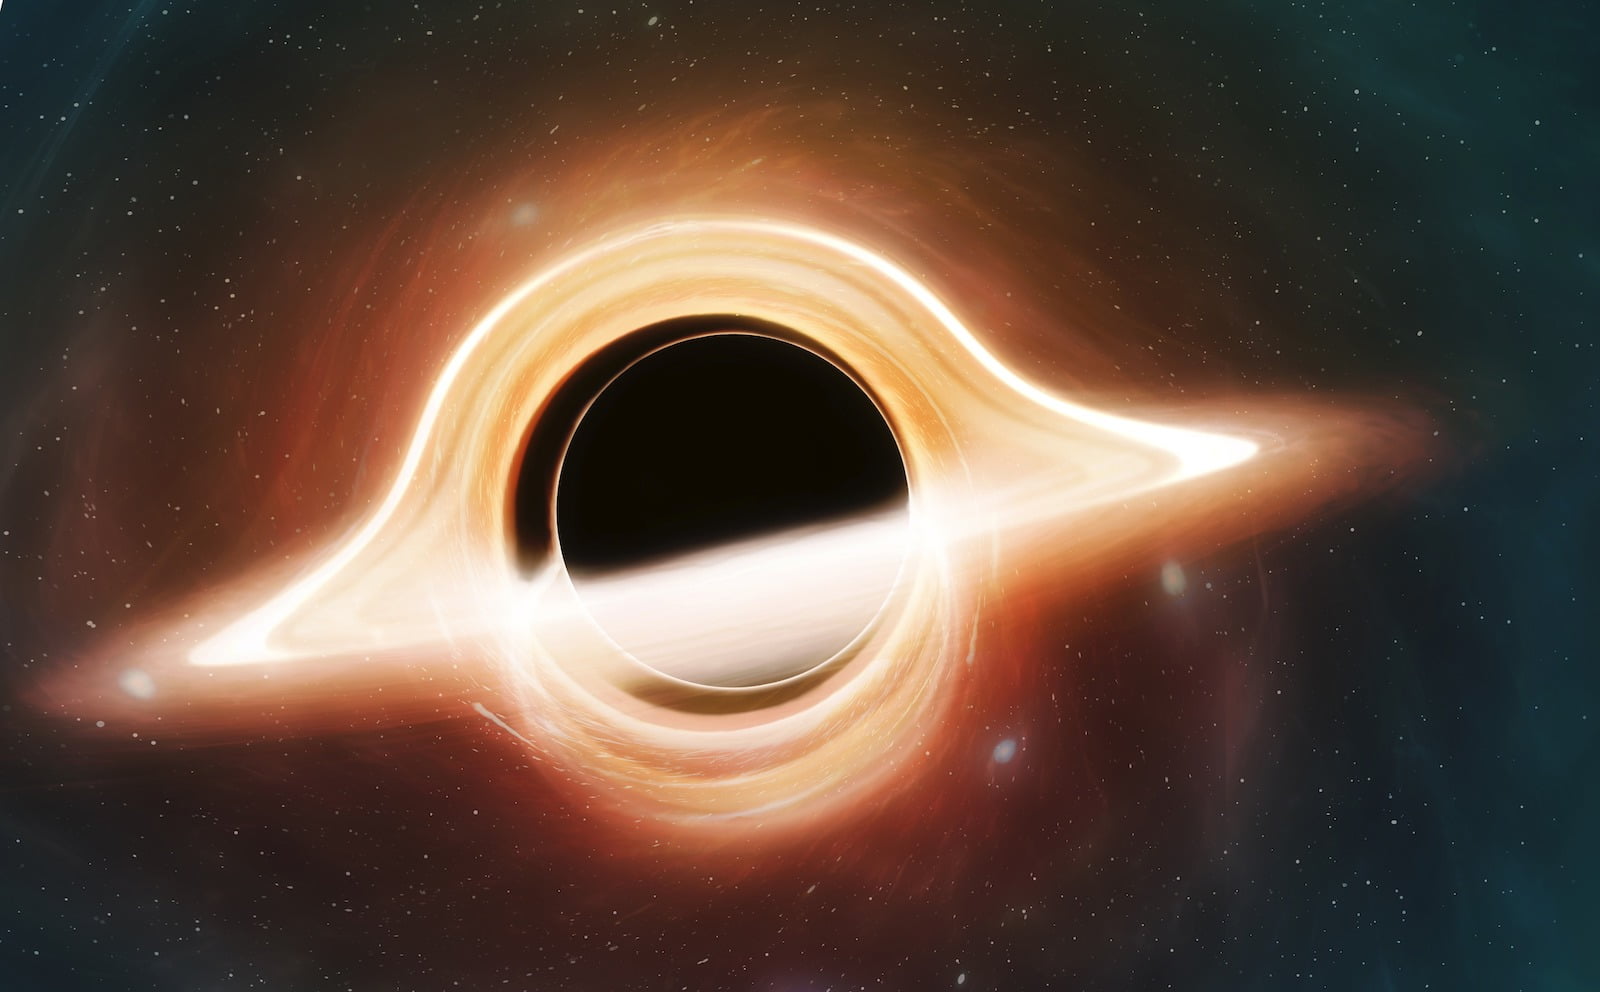 What’s On The Other Side Of A Black Hole?